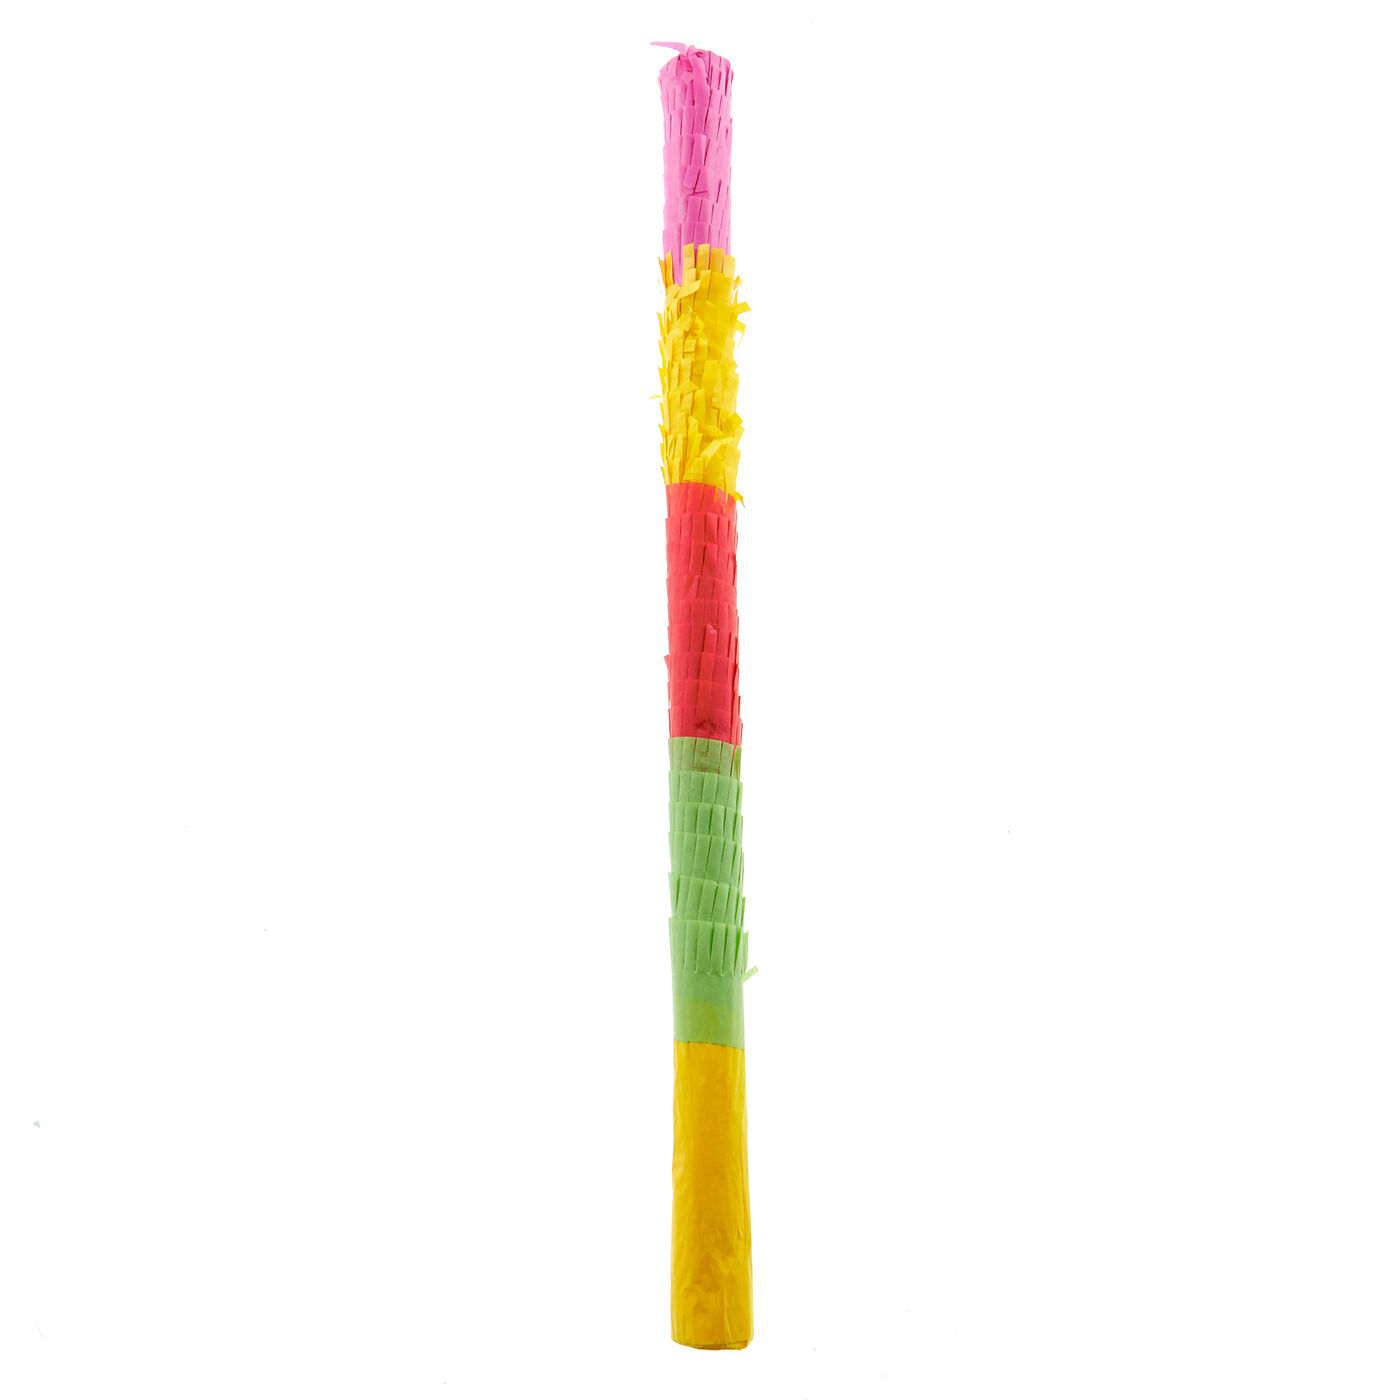 Buy Pinata Stick for GBP 1.99